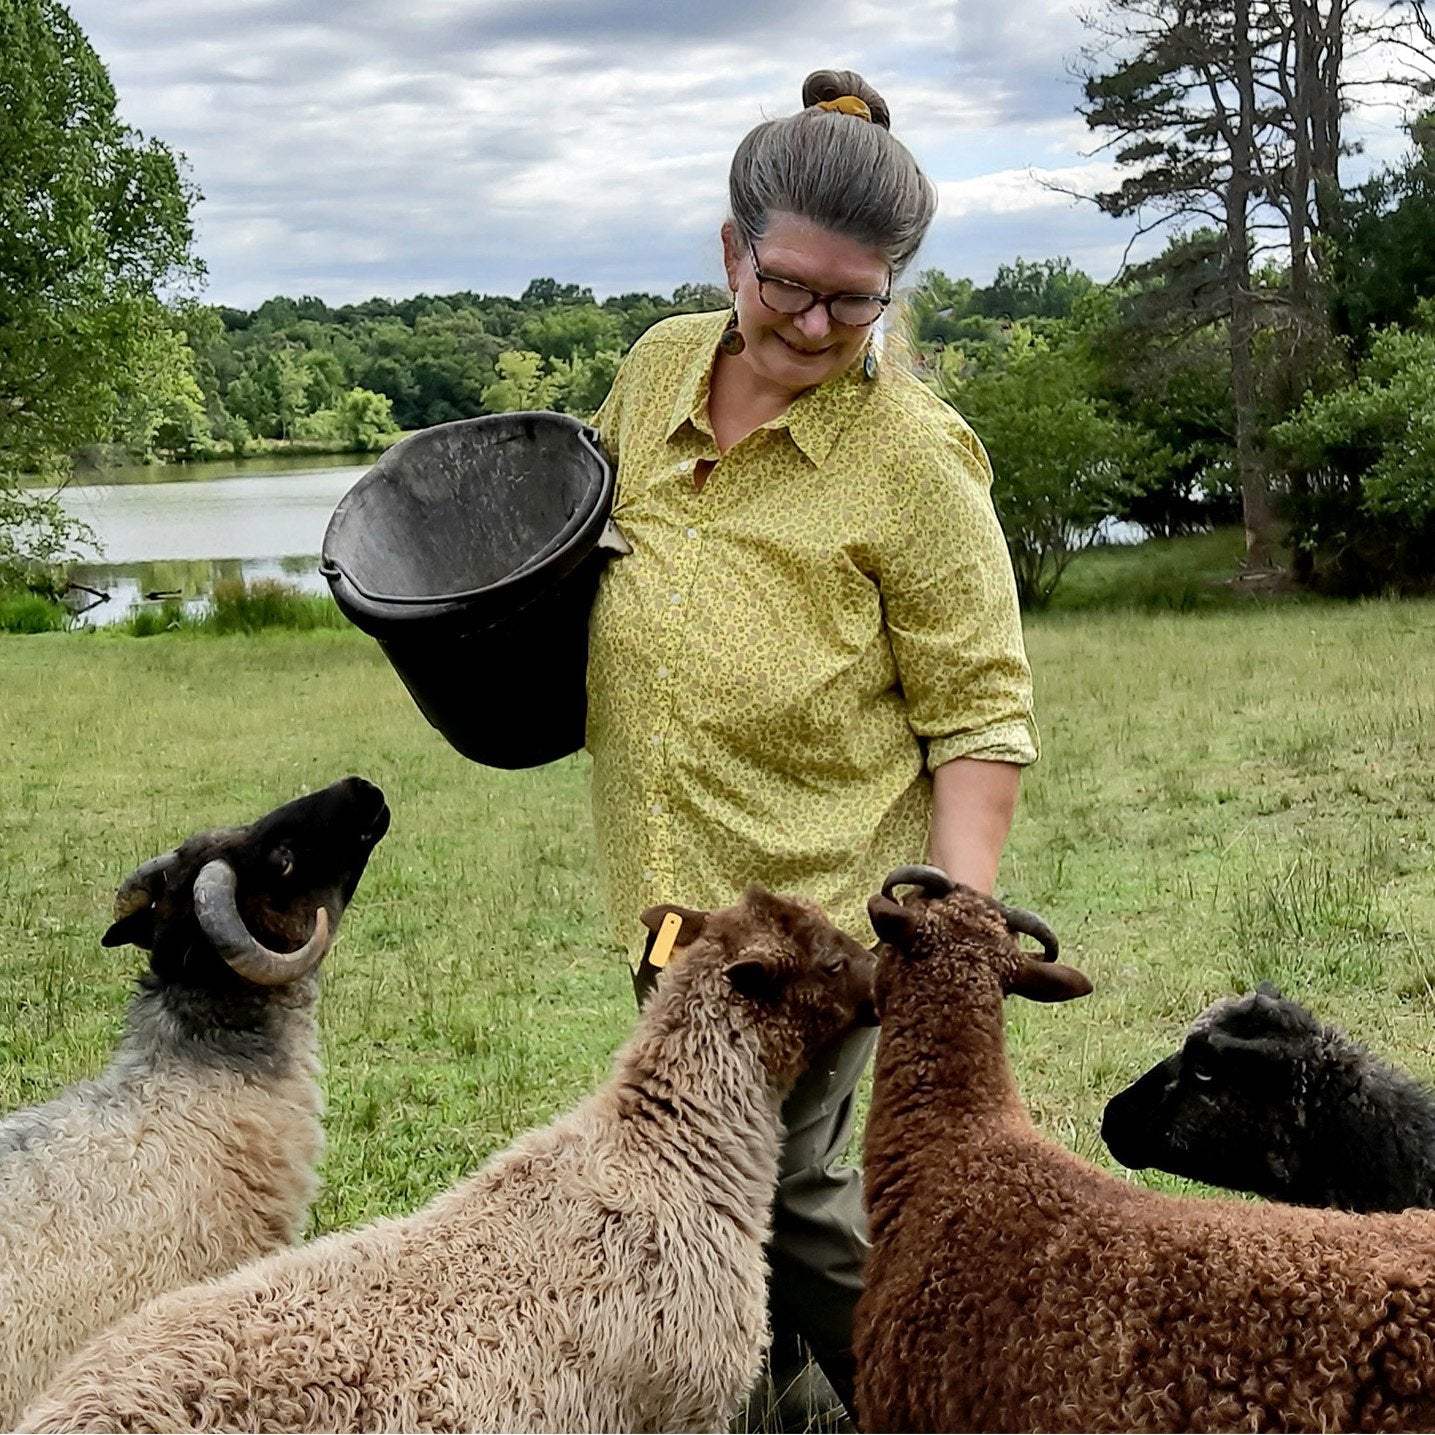 Ancient and Modern & Farm to Fabric, hosted by Polly Leonard of Selvedge Magazine, UK